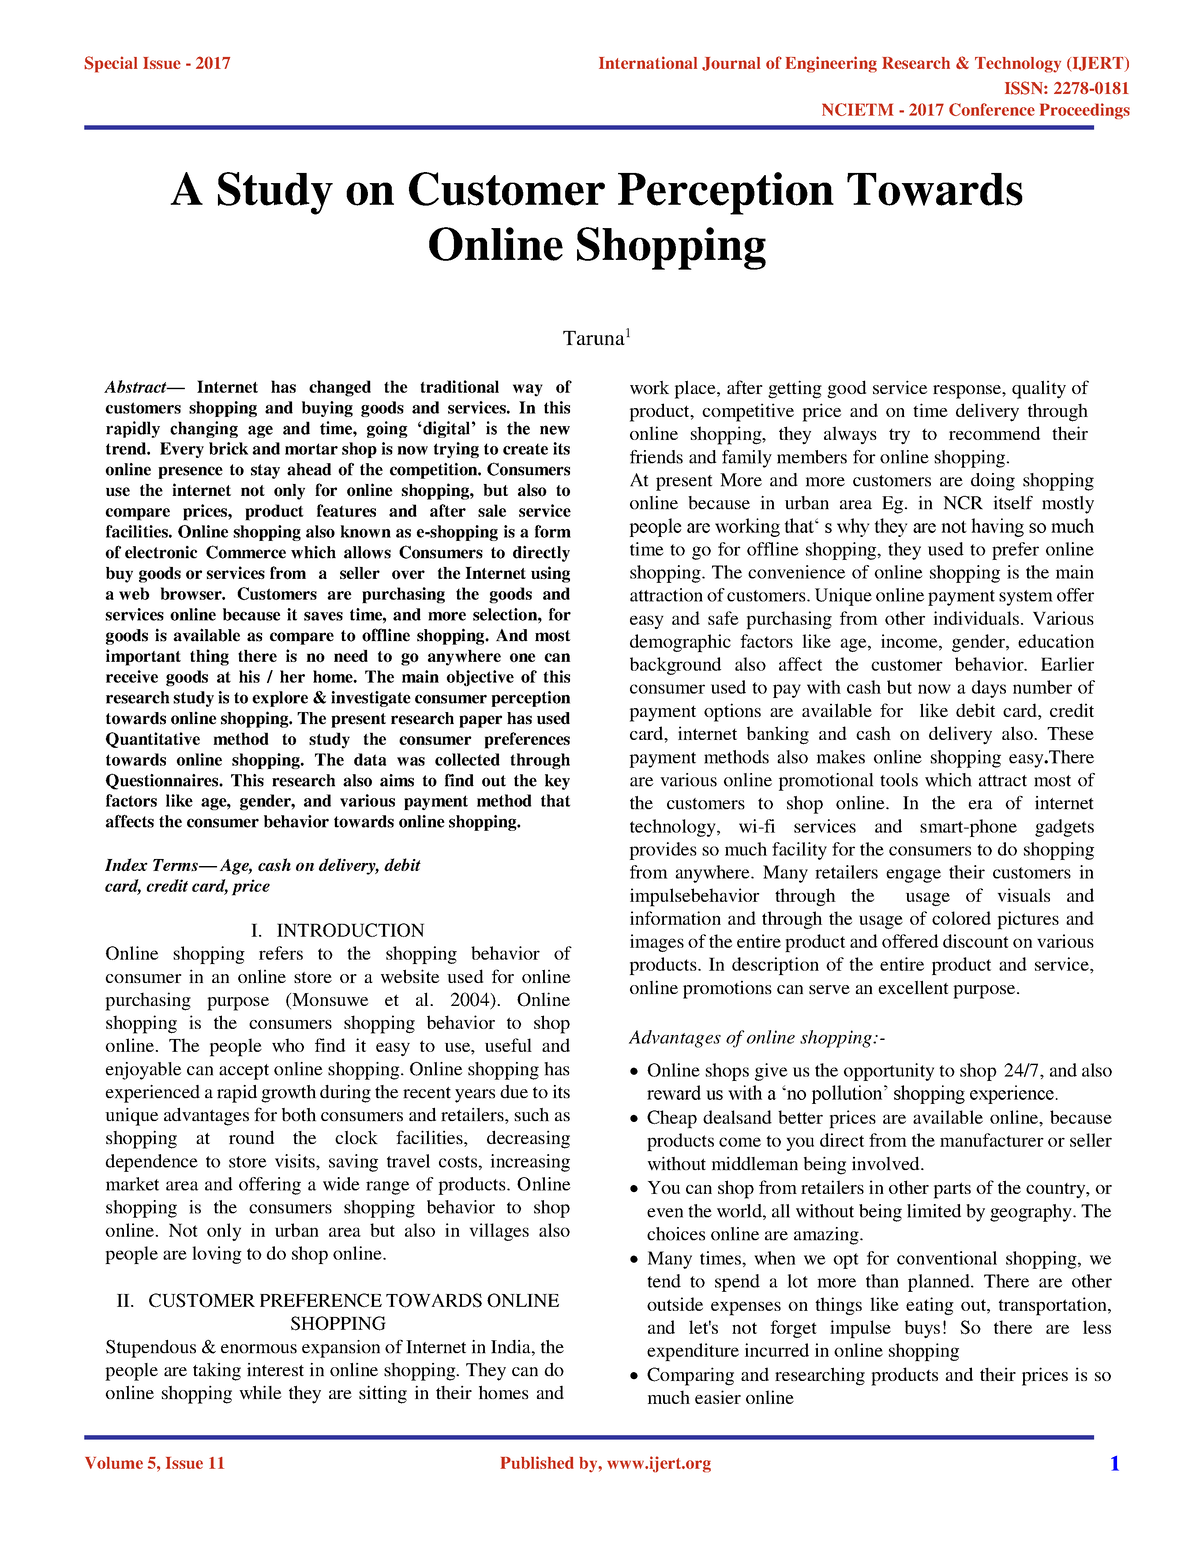 online shopping research paper philippines